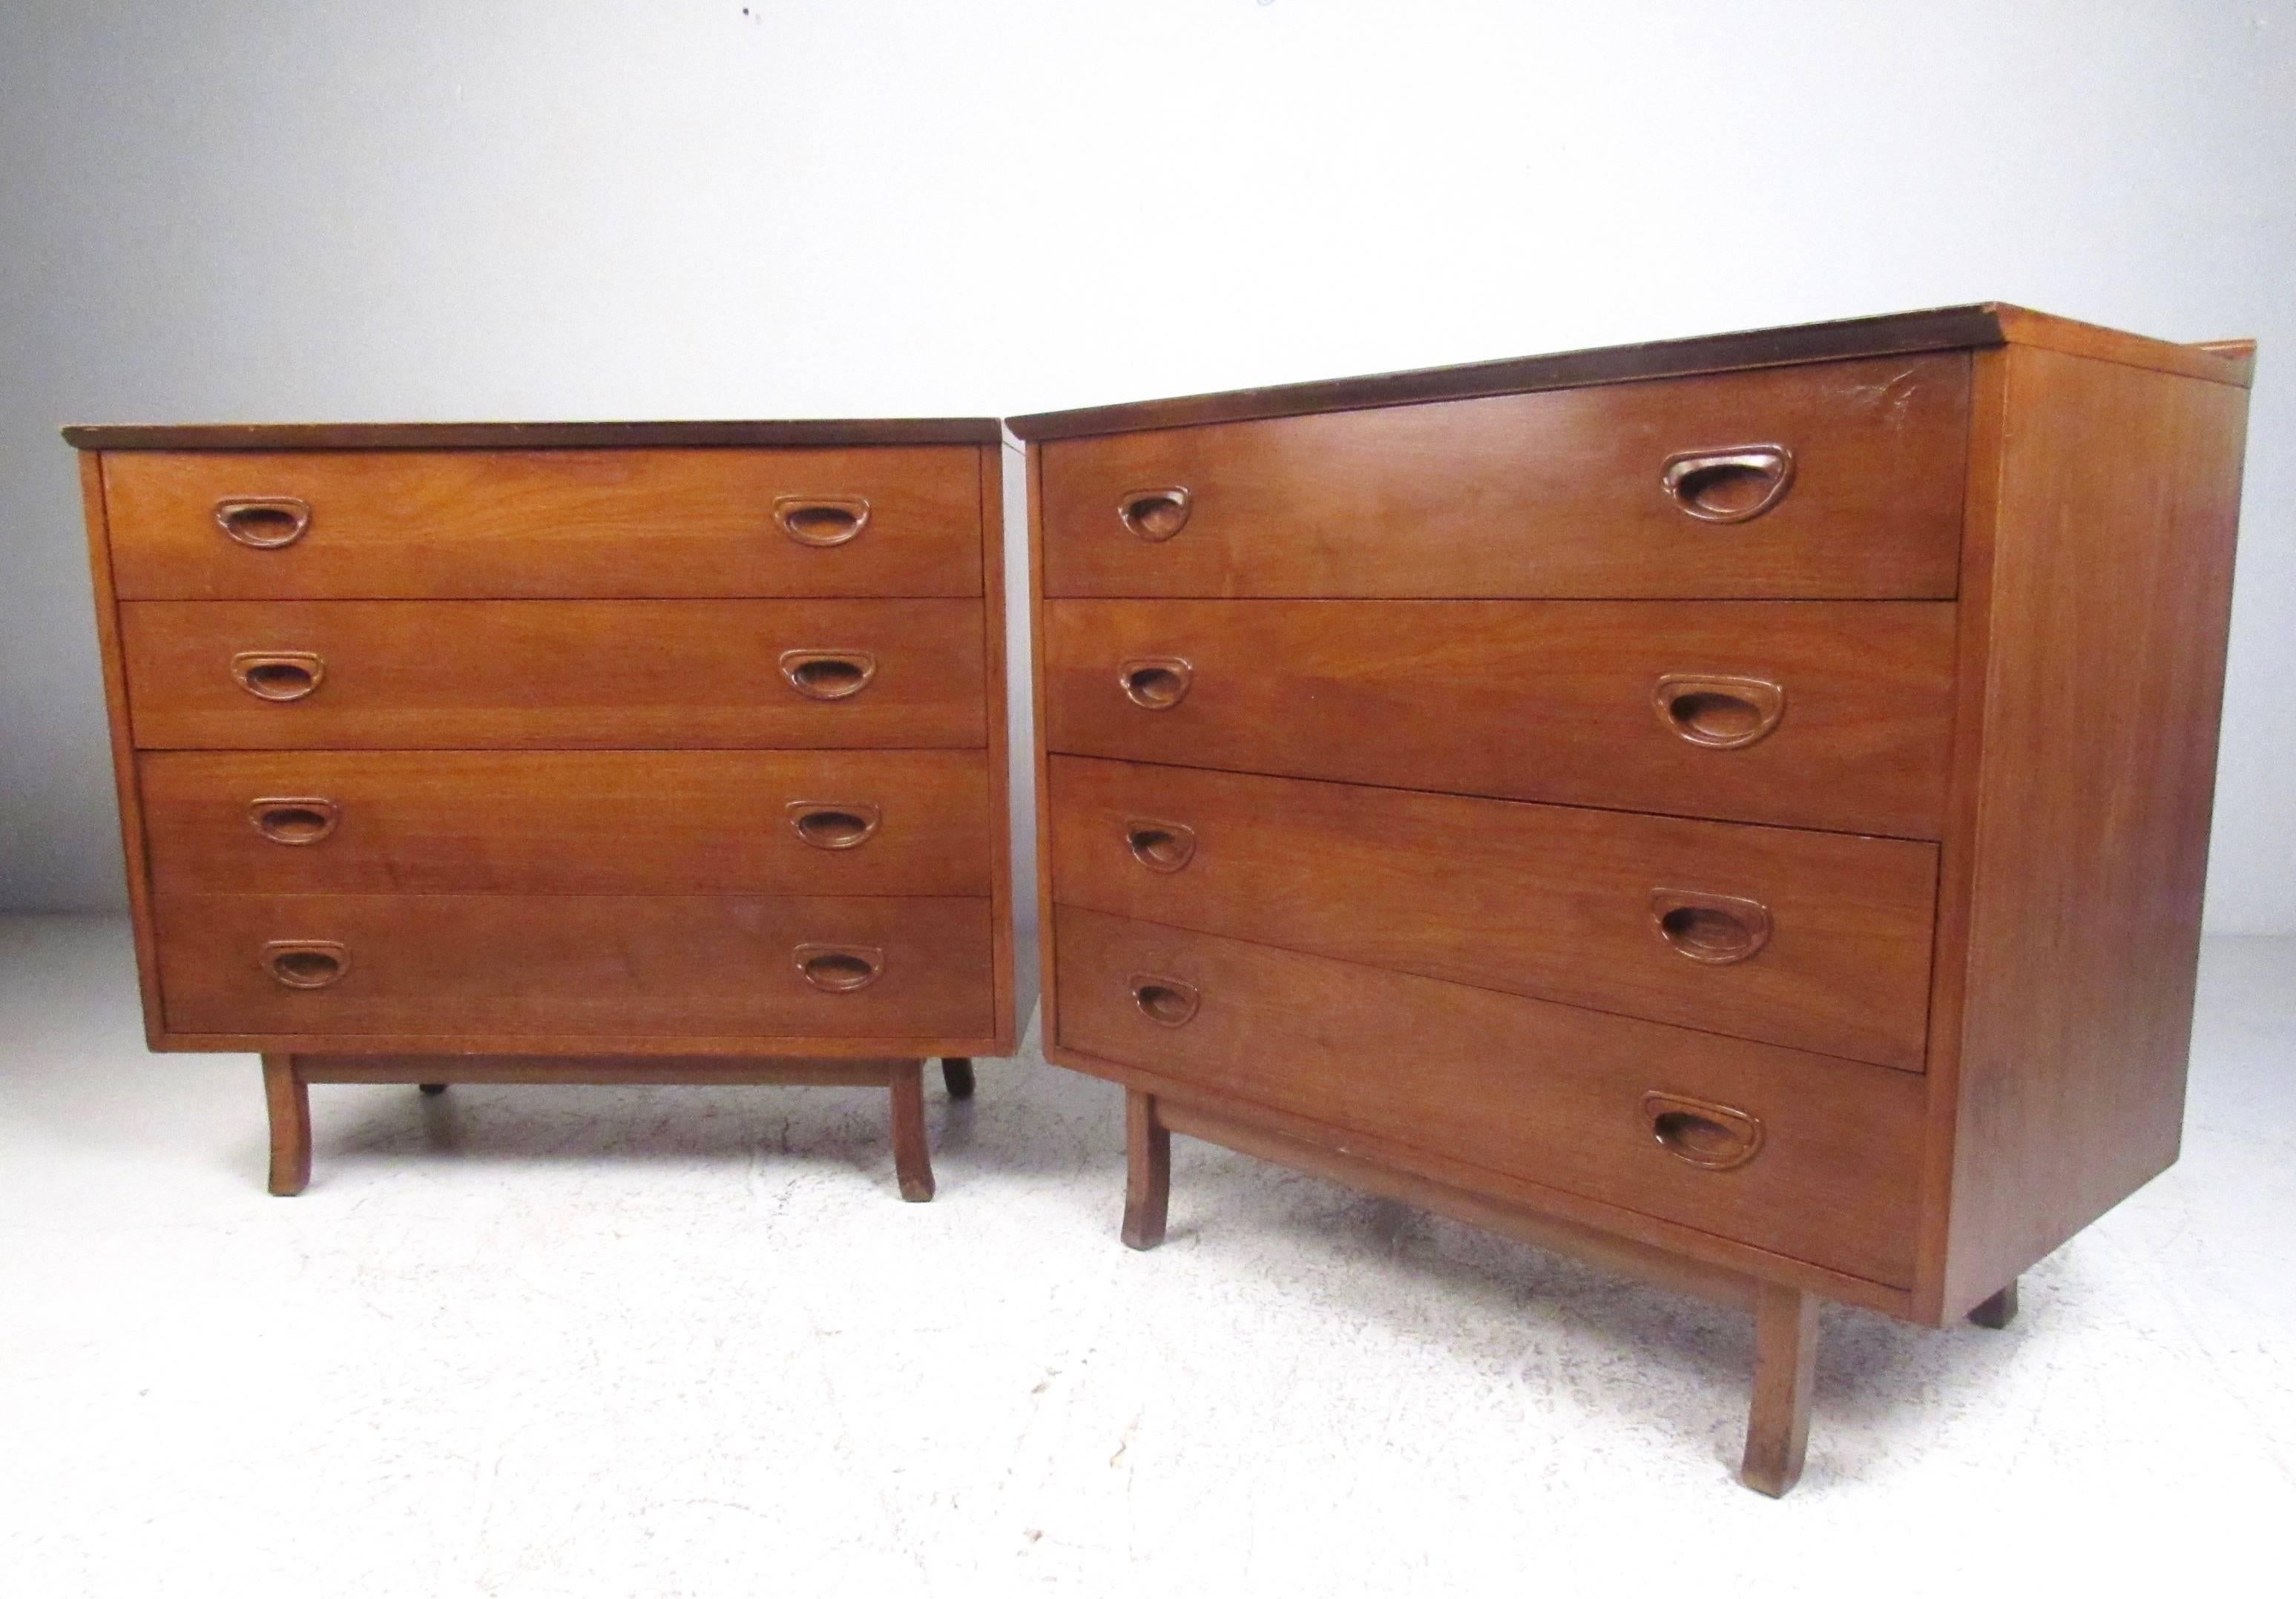 This stylish pair of American walnut dressers feature four spacious drawers, carved pulls, and raised rear edges. Slight taper to the sculpted hardwood legs rounds out the Mid-Century Modern appeal of this vintage matching pair. Please confirm item